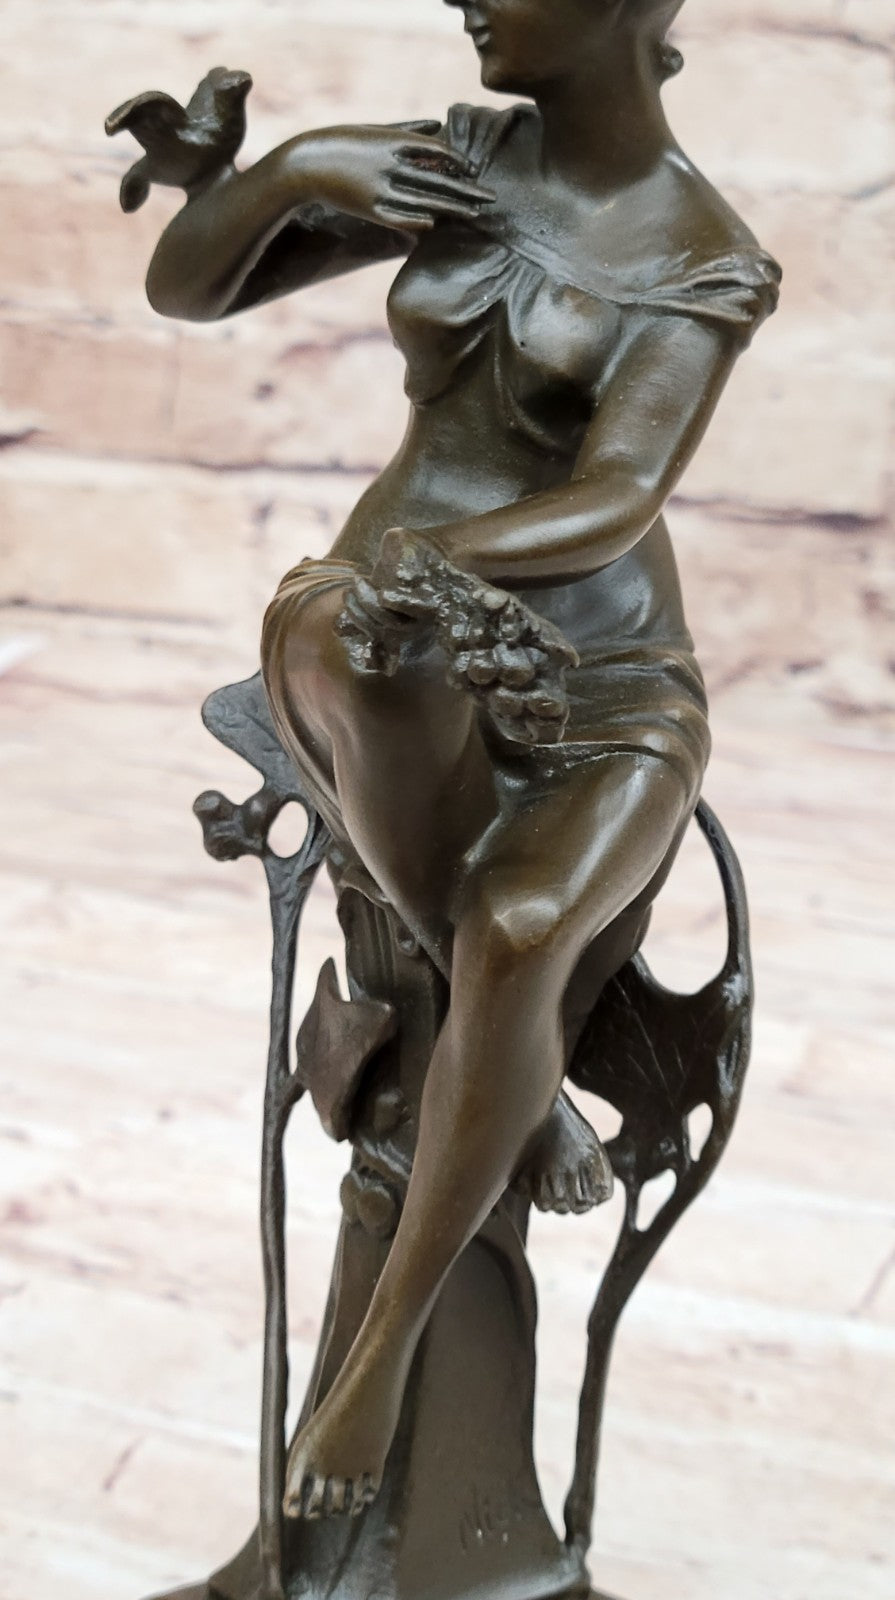 Girl with Bird on The Hand Mid Century Gift Bronze Sculpture Signed by Artist